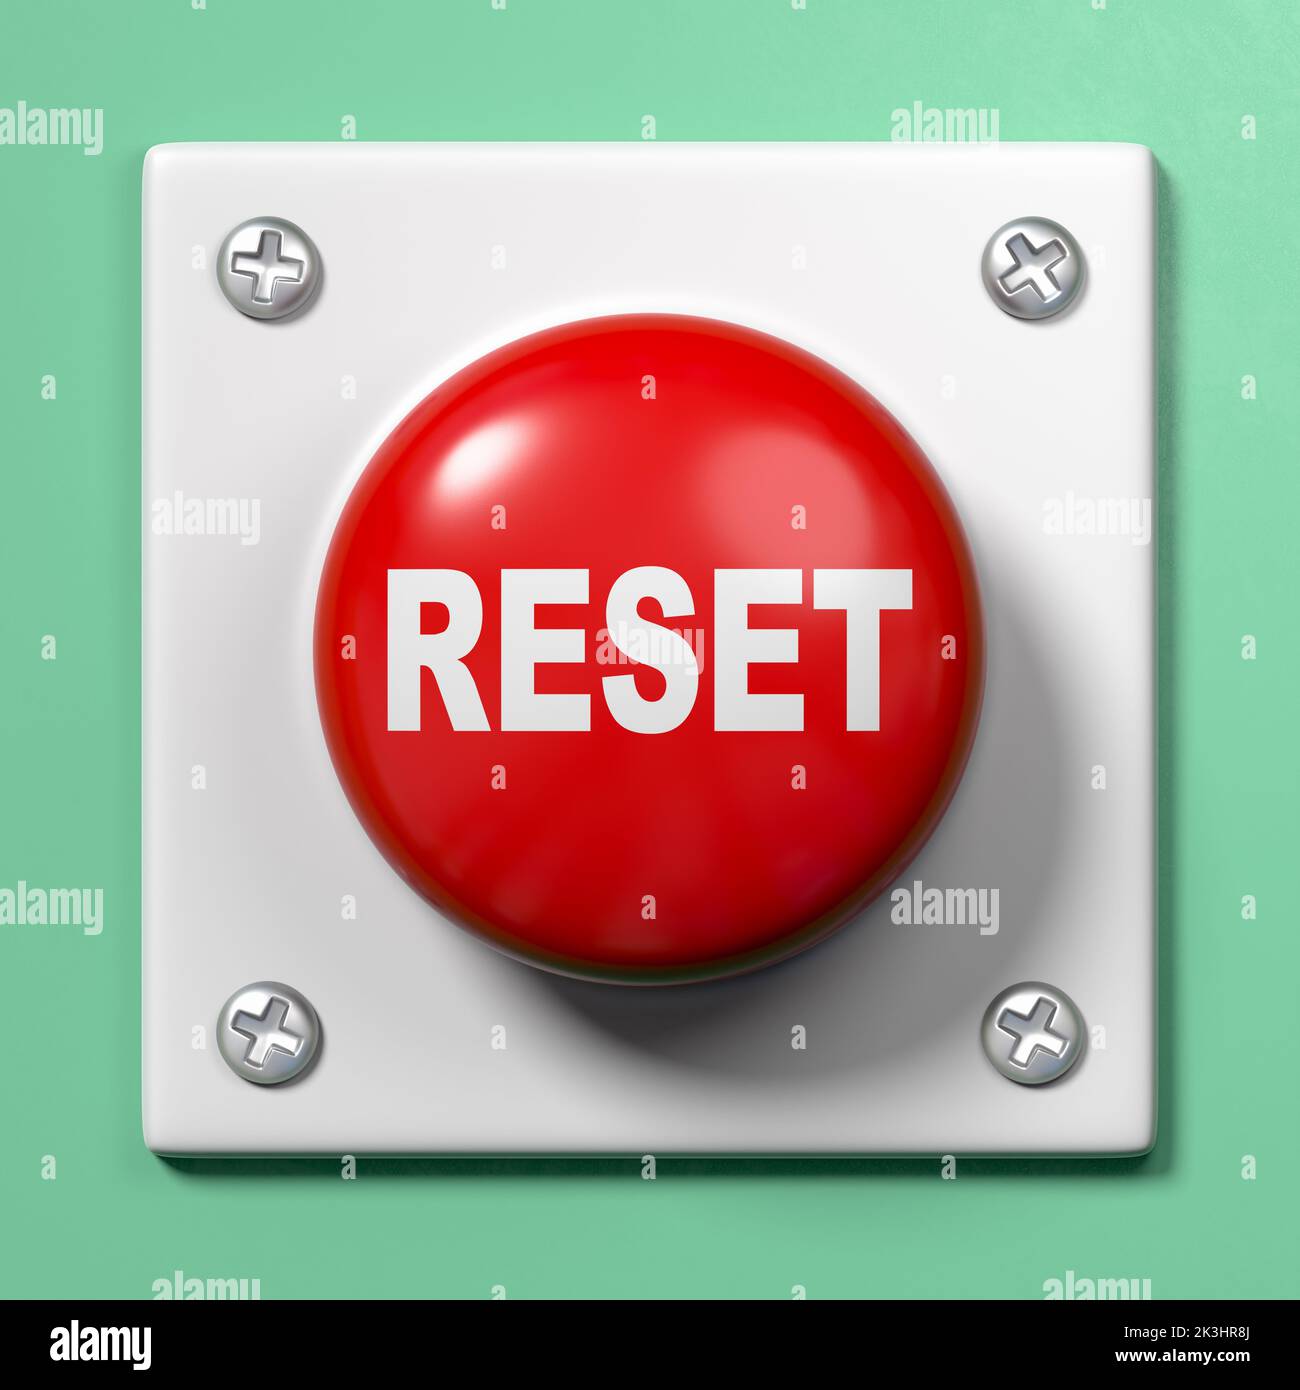 Reset Button on Green Background Stock Photo